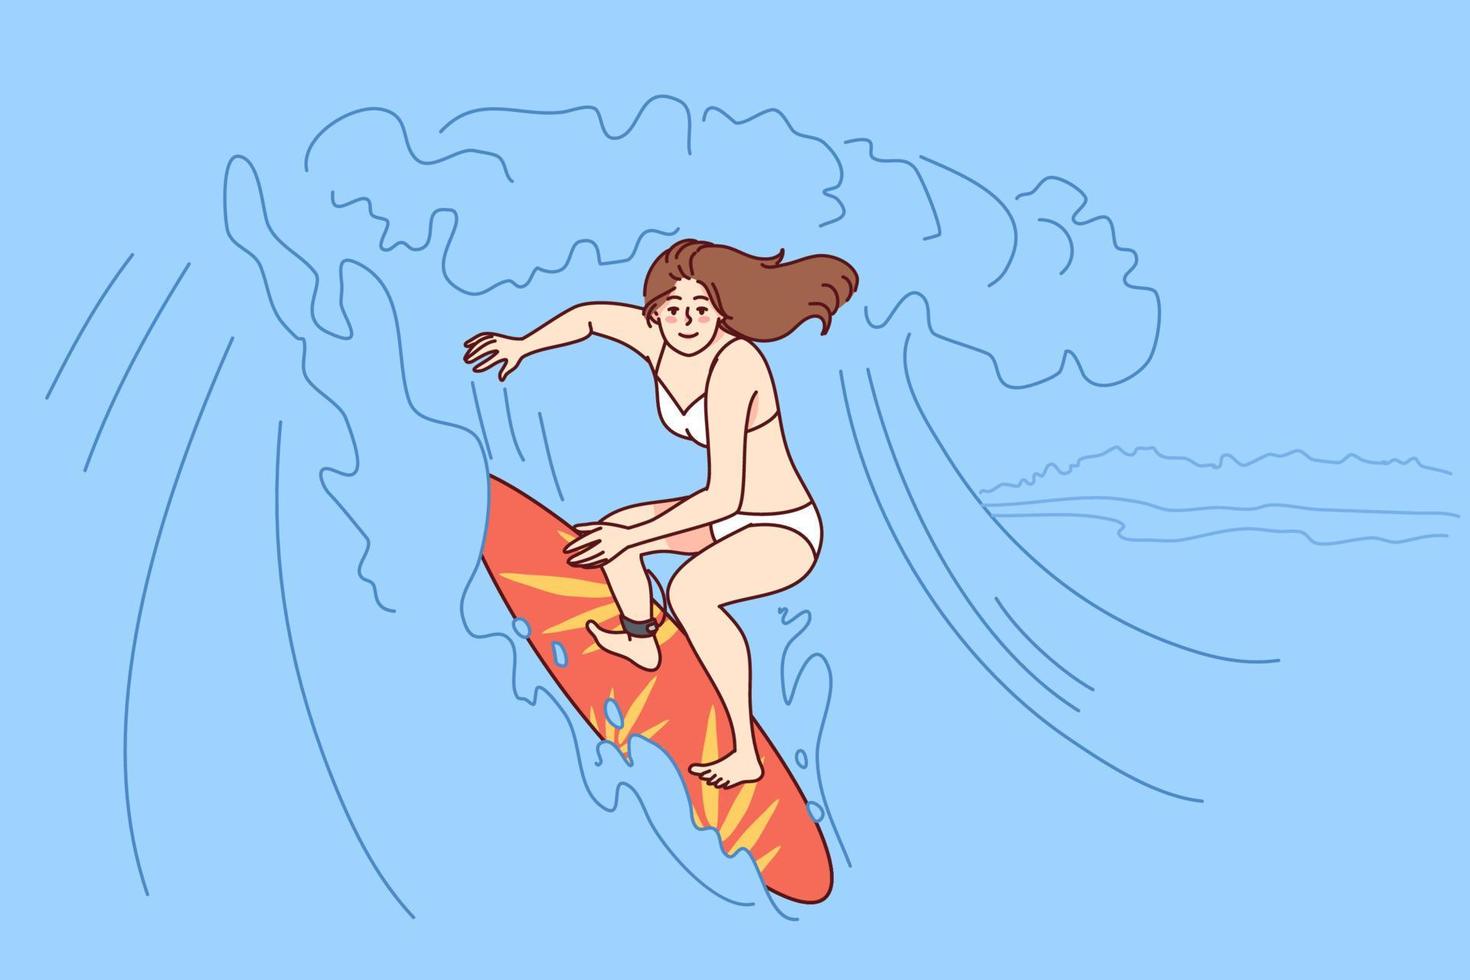 Happy woman in bikini surfing on waves in ocean on board. Smiling active female surfer have fun enjoy summer vacation. Vector illustration.